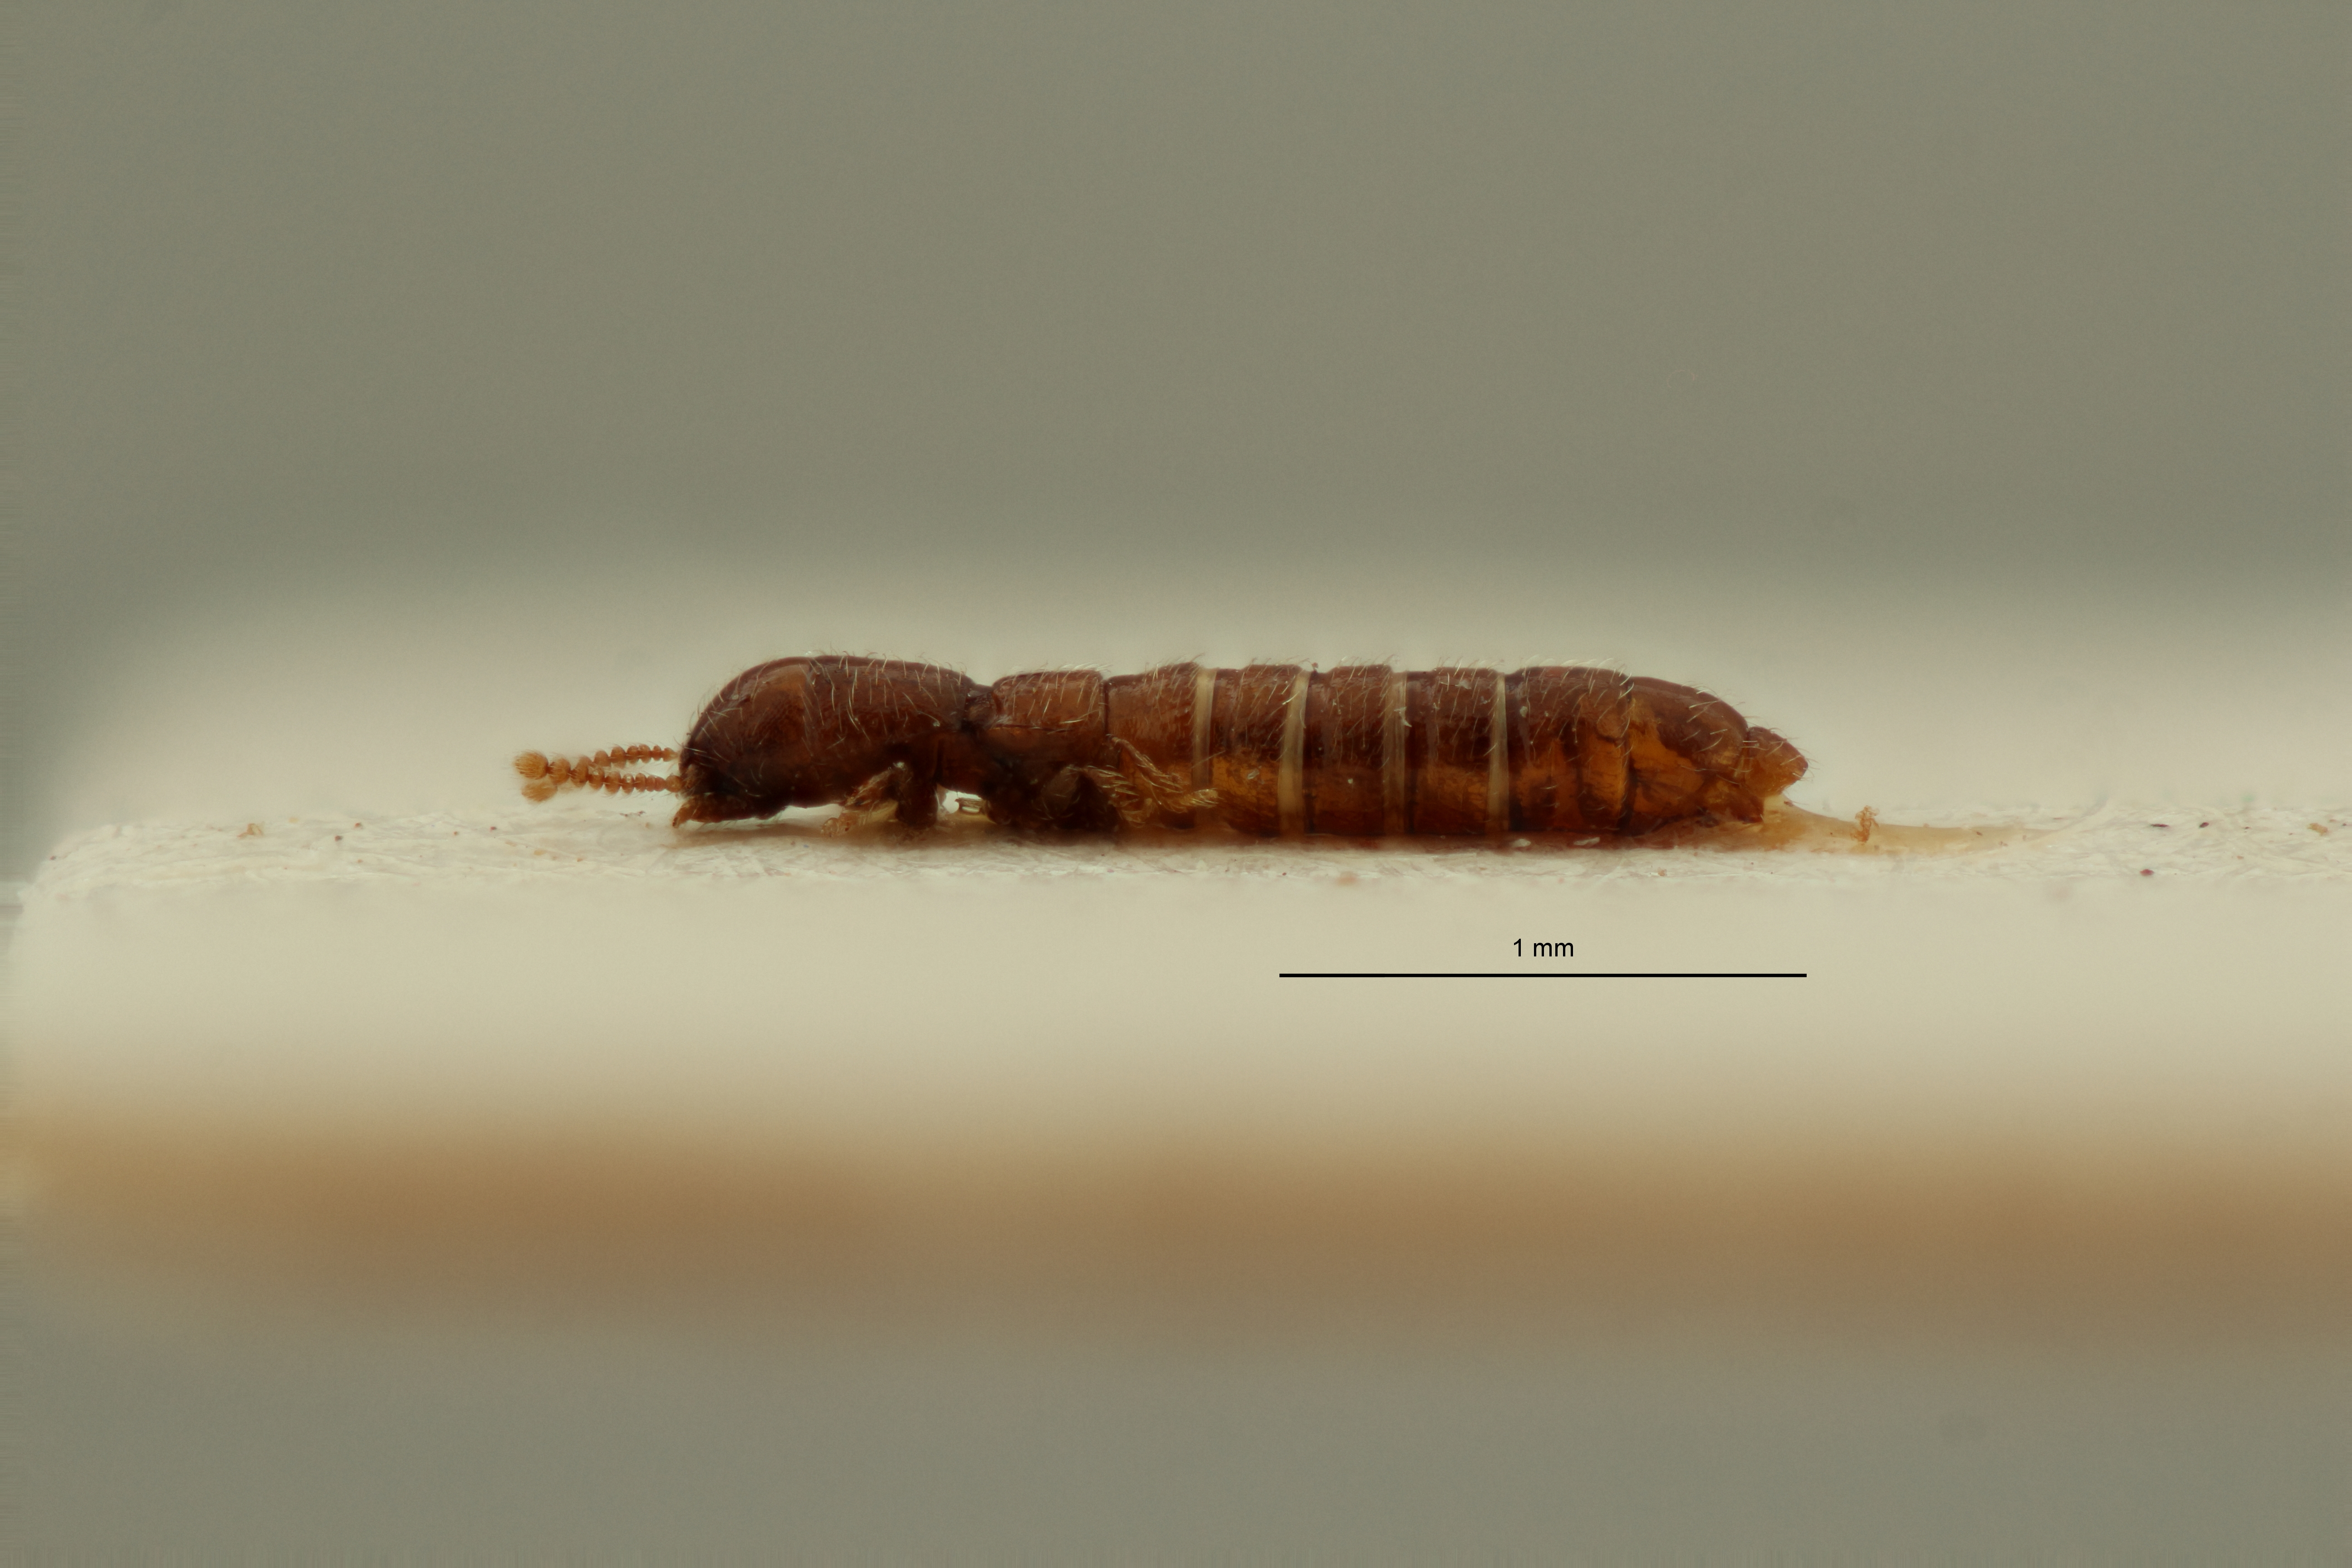 Heterocylindropsis kahuziensis pt L ZS PMax Scaled.jpeg